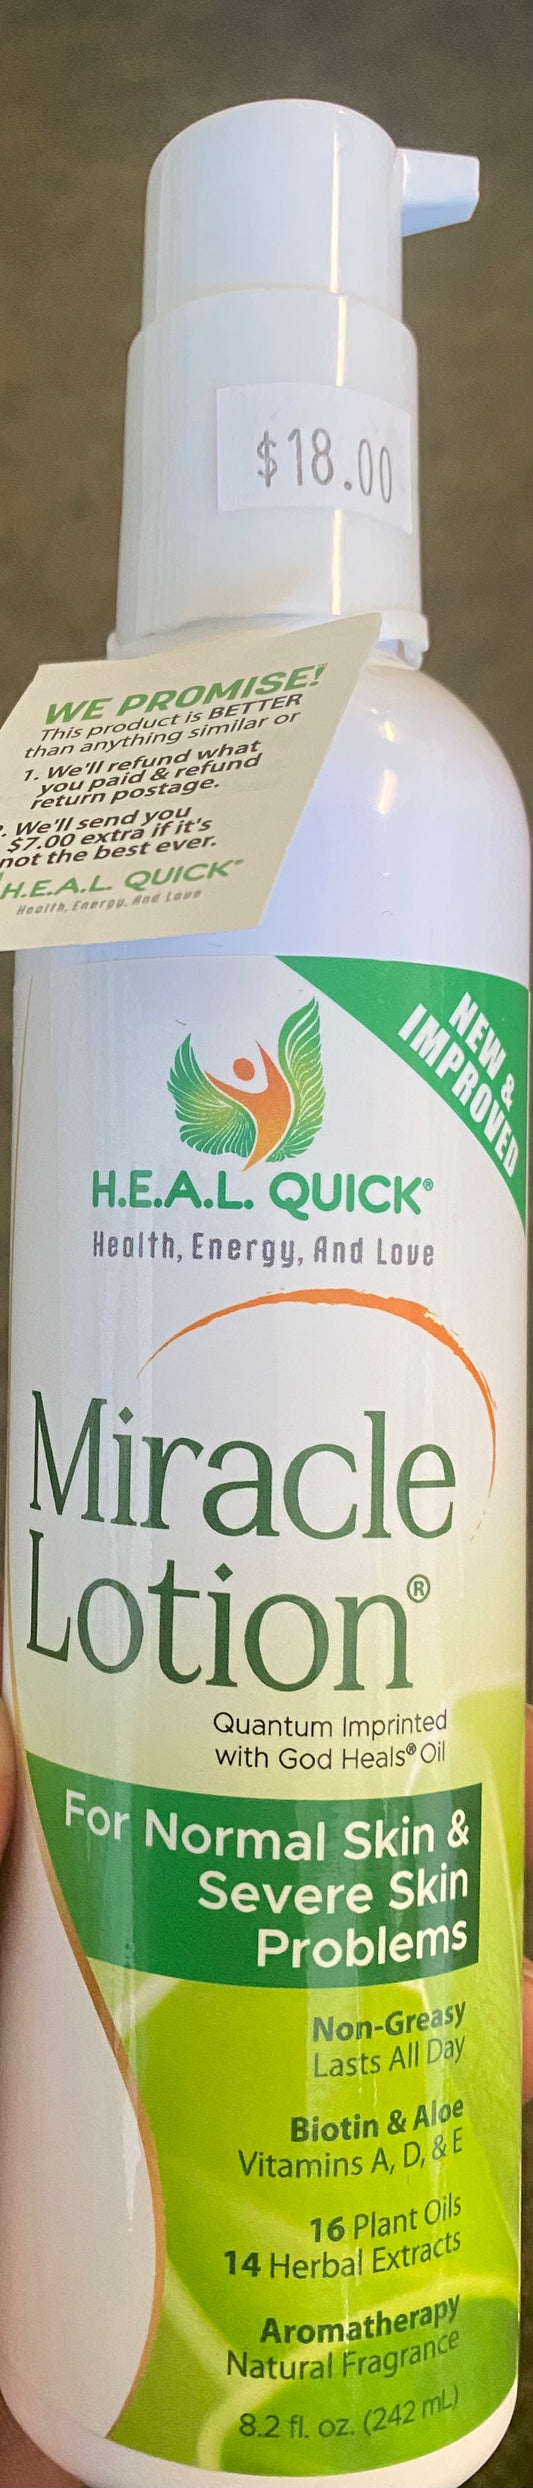 Miracle Lotion (HEAL QUICK)